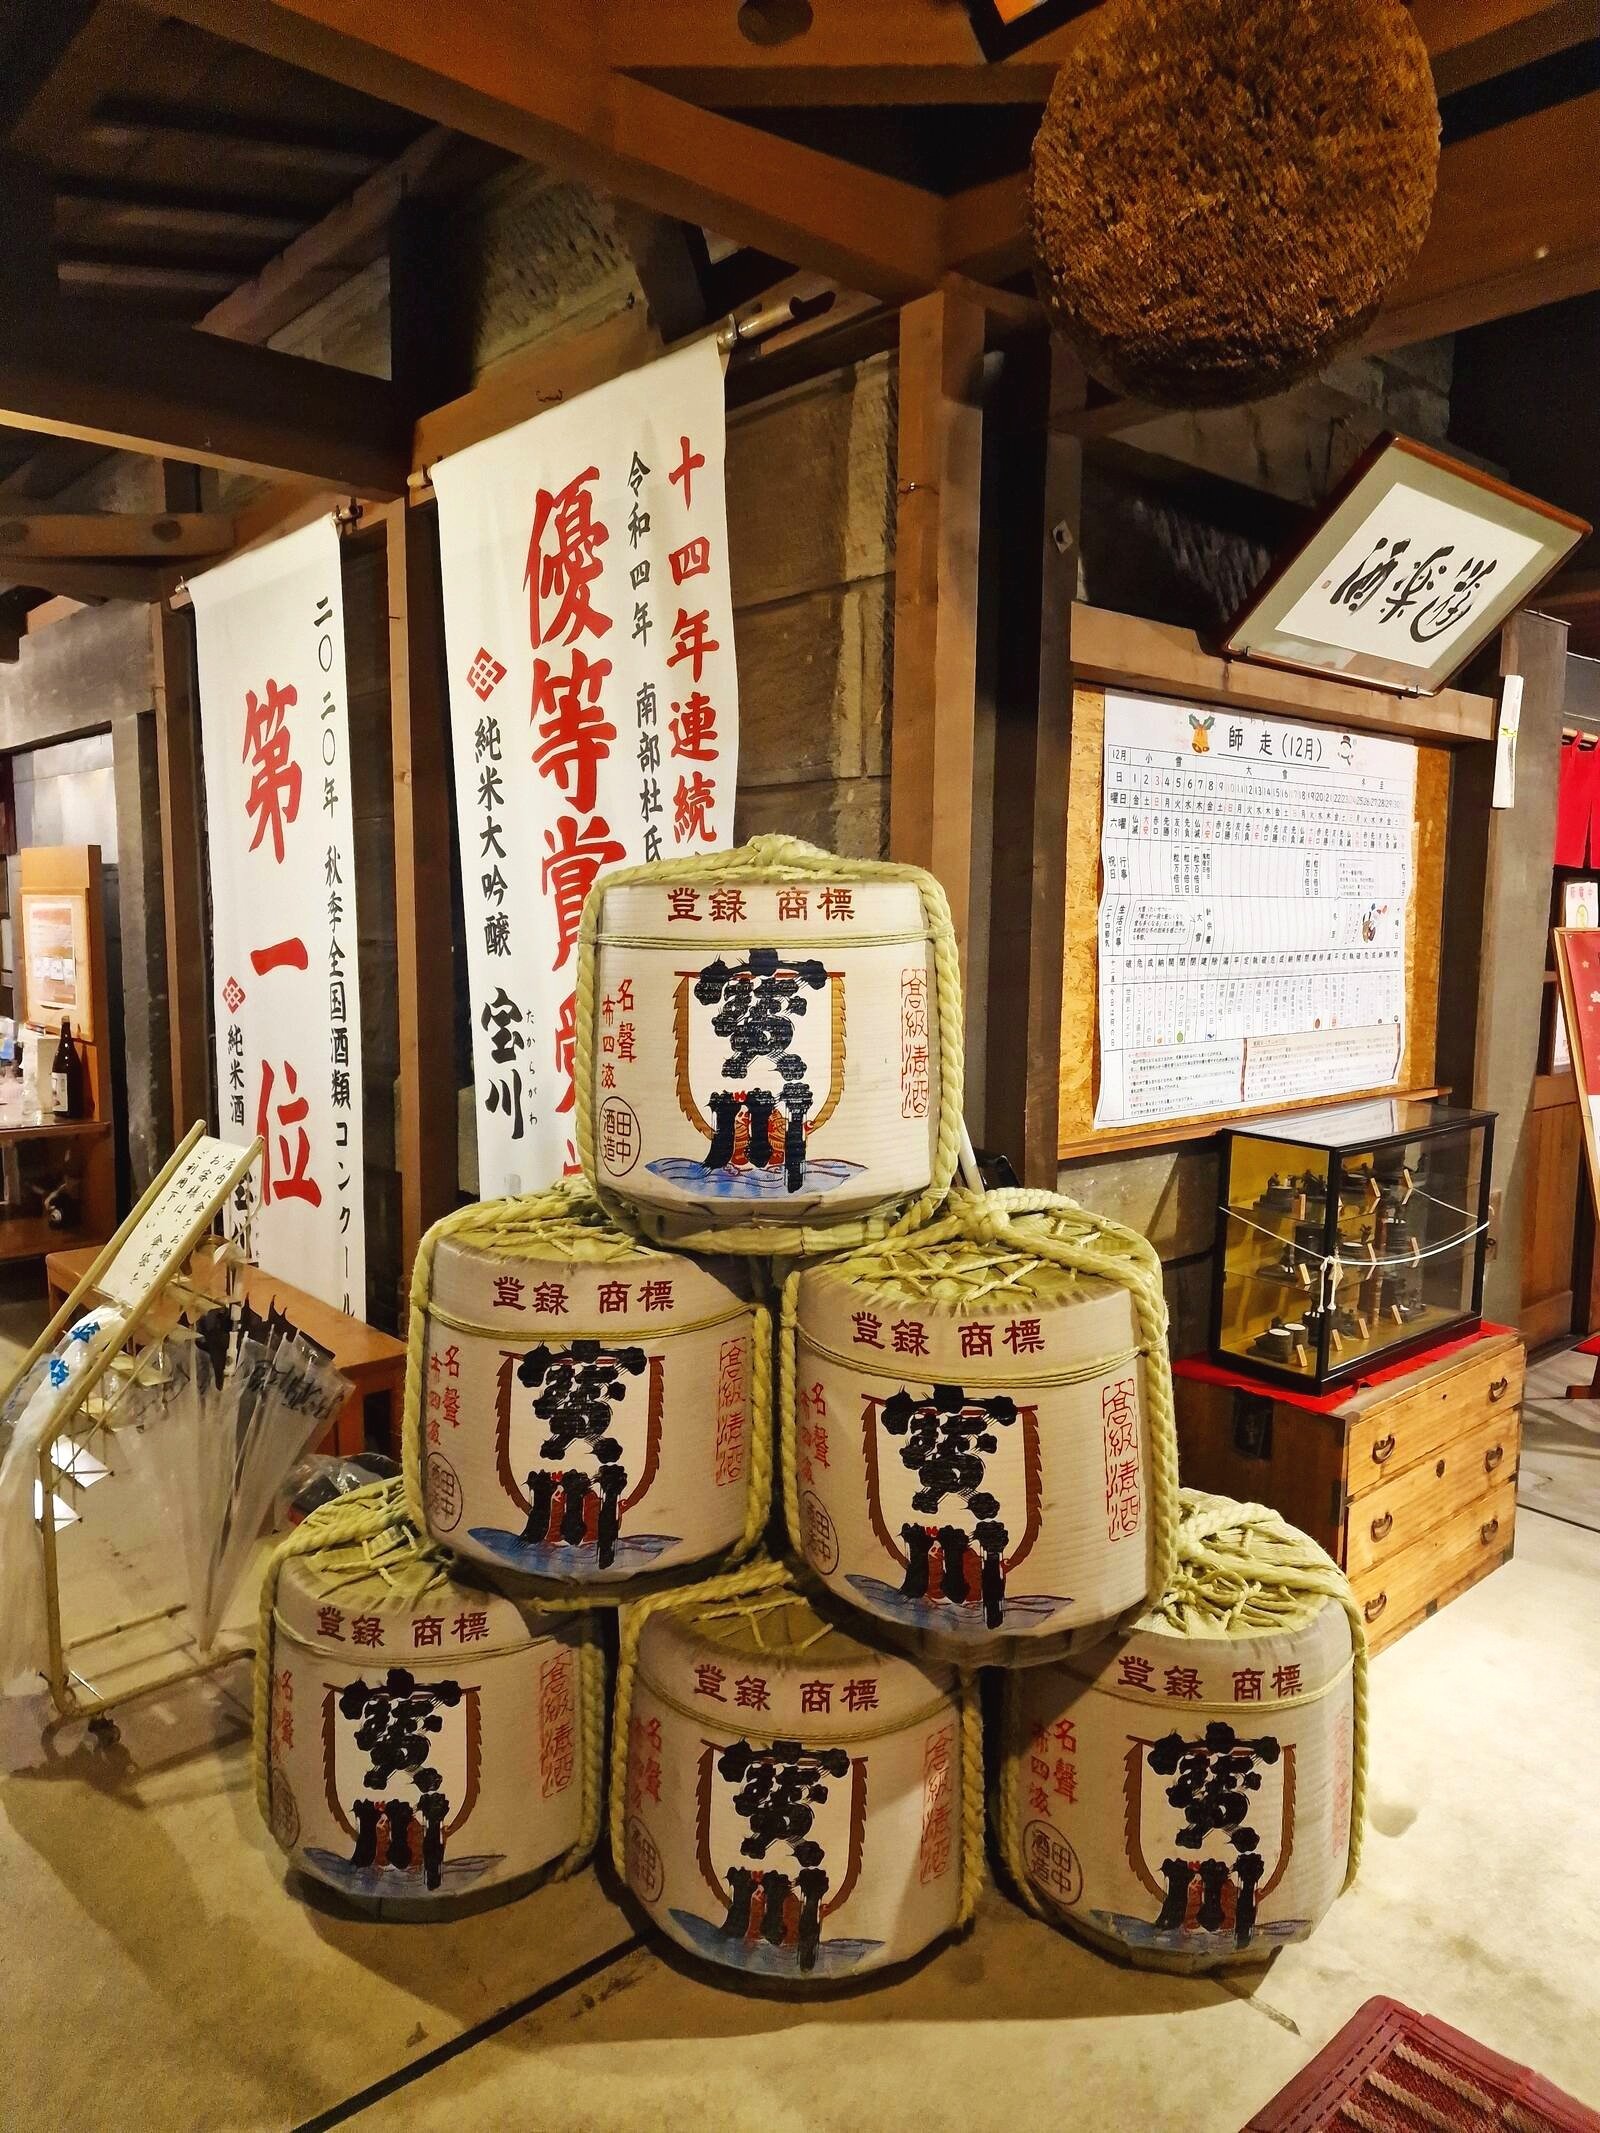 6 sake barrels stacked in a pyramid shape